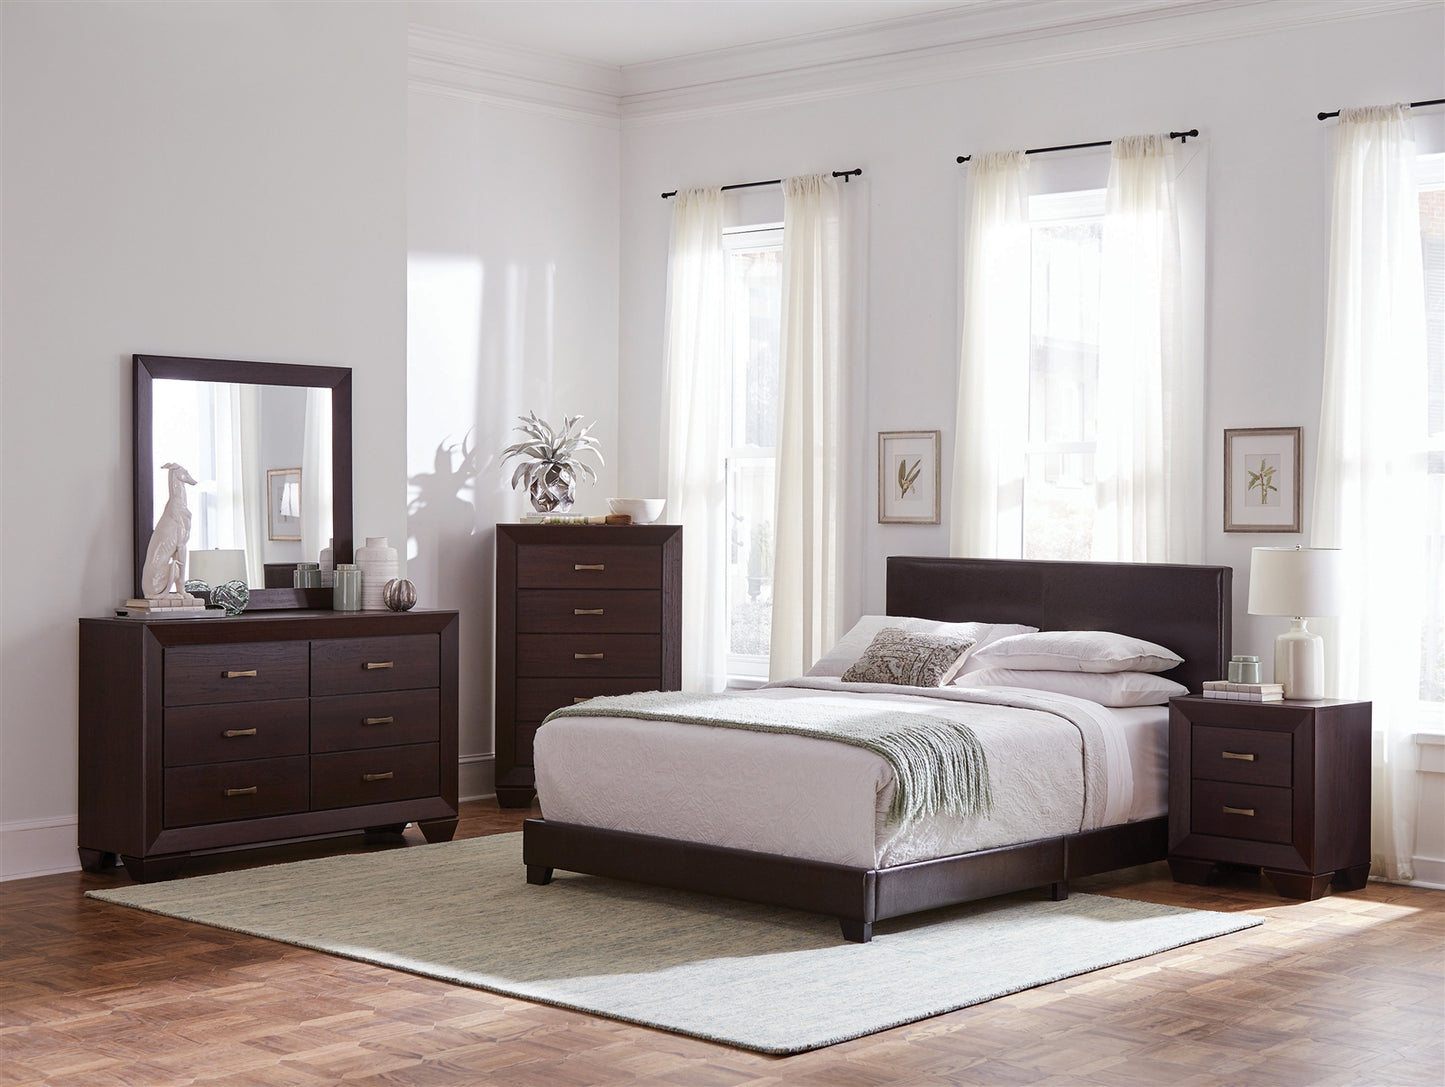 Simms Cocoa Brown Leatherette King Bed